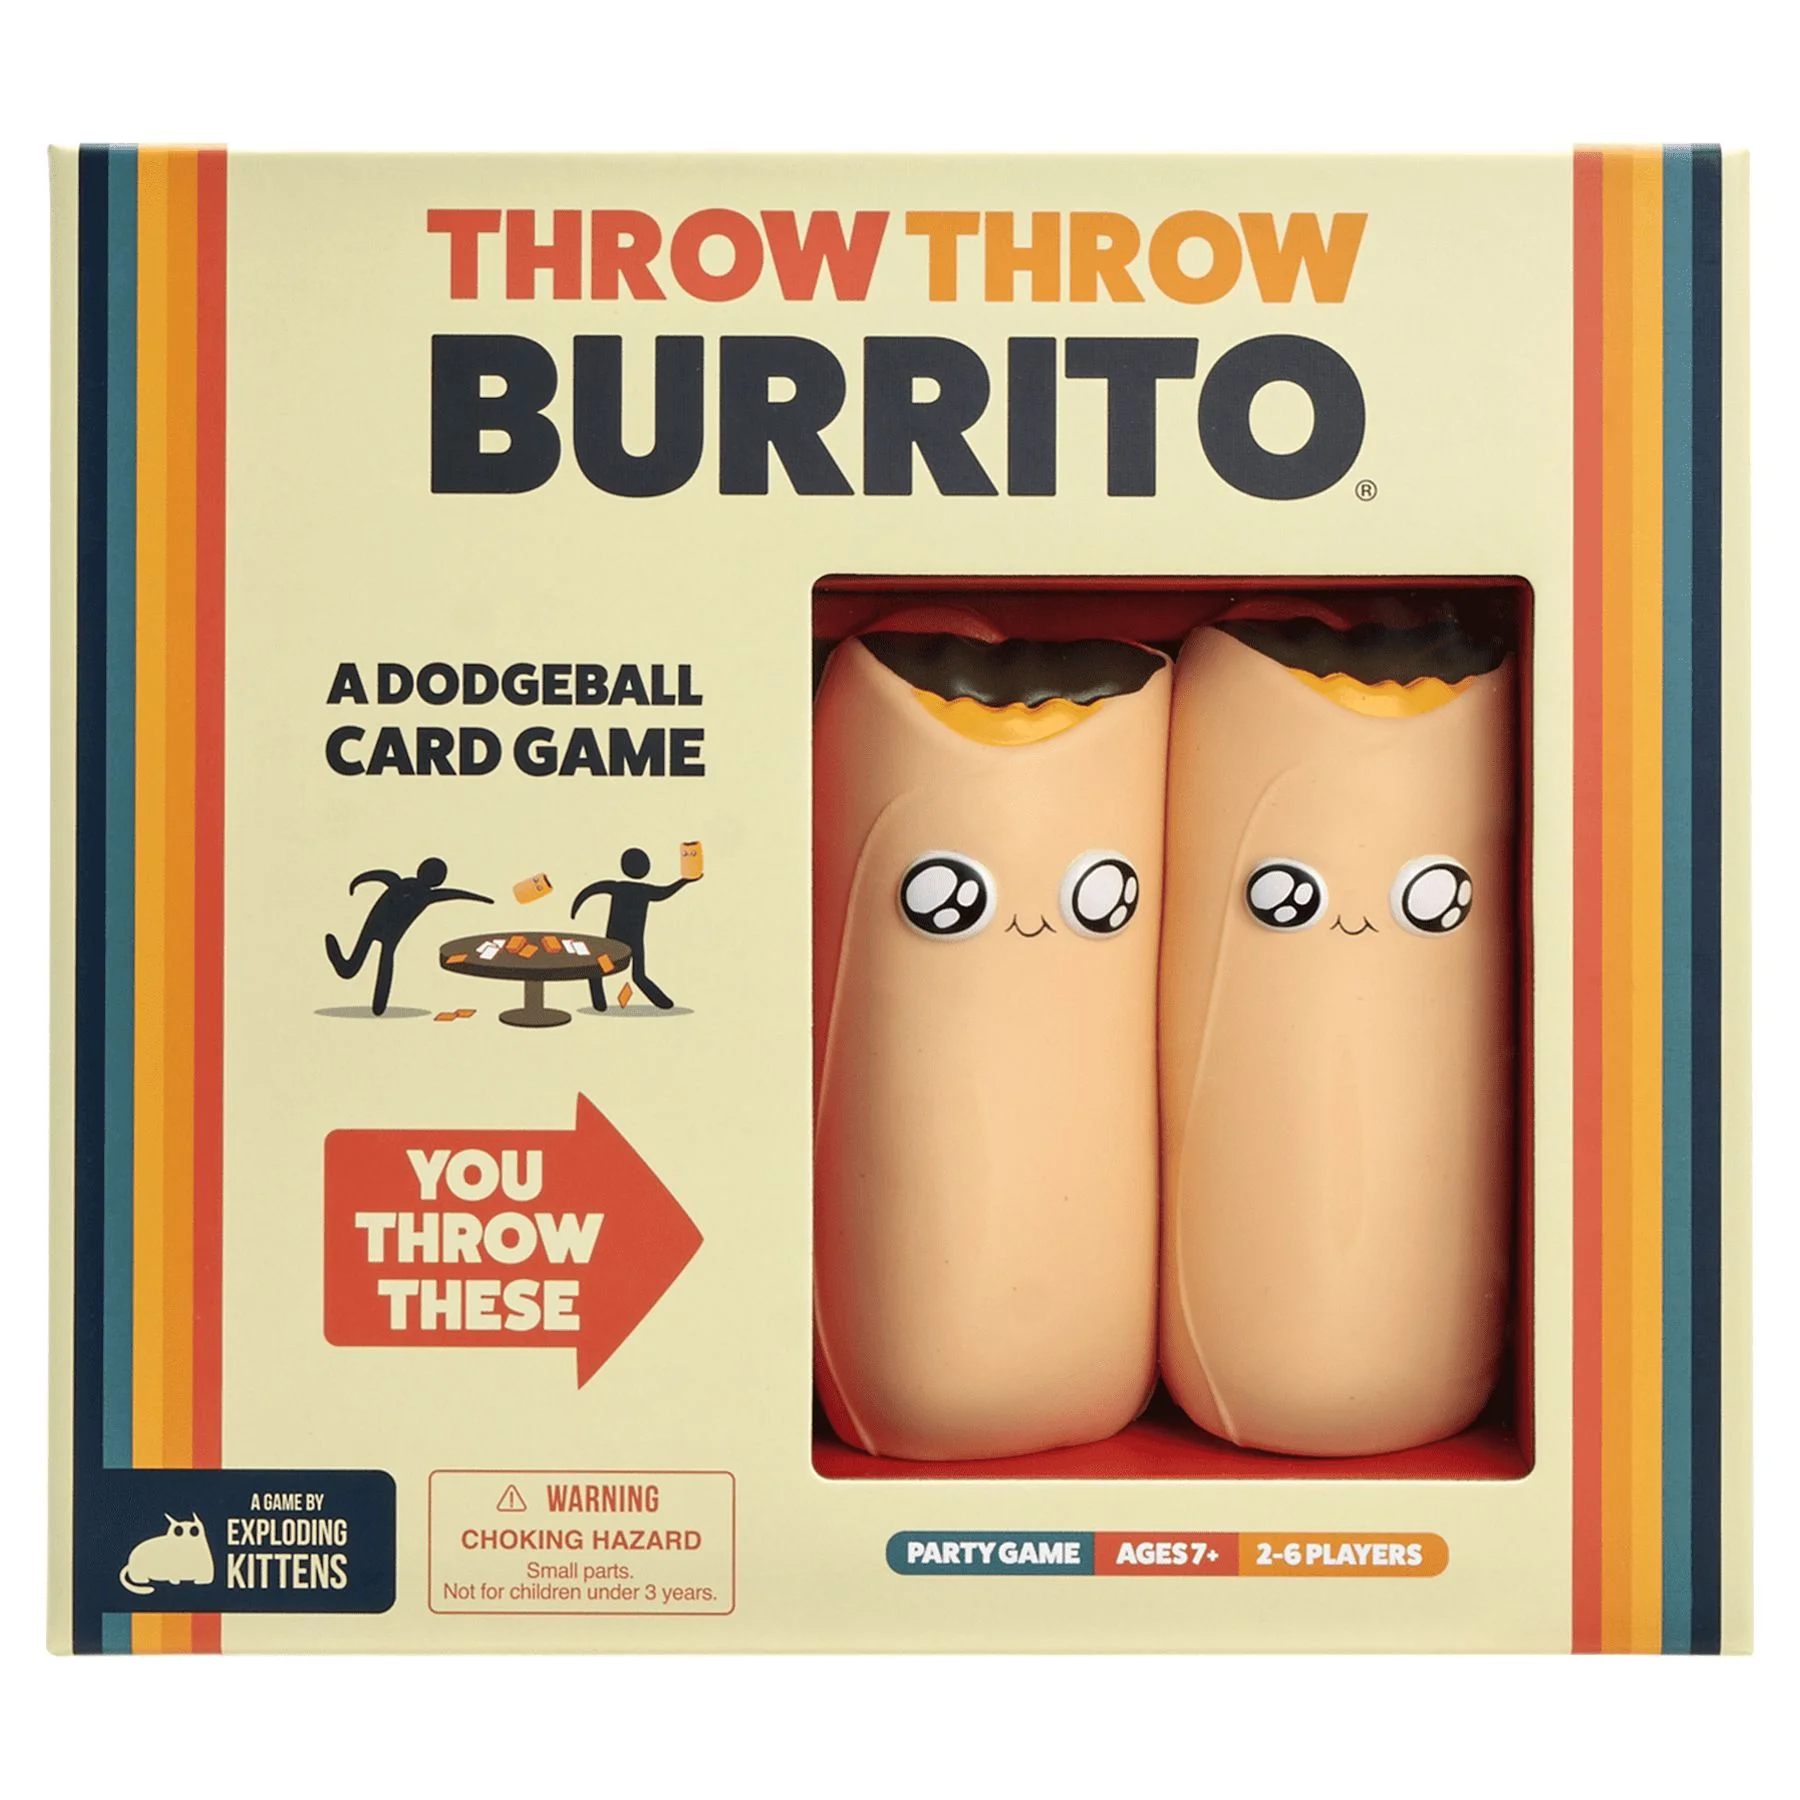 the burrito game in its packaging